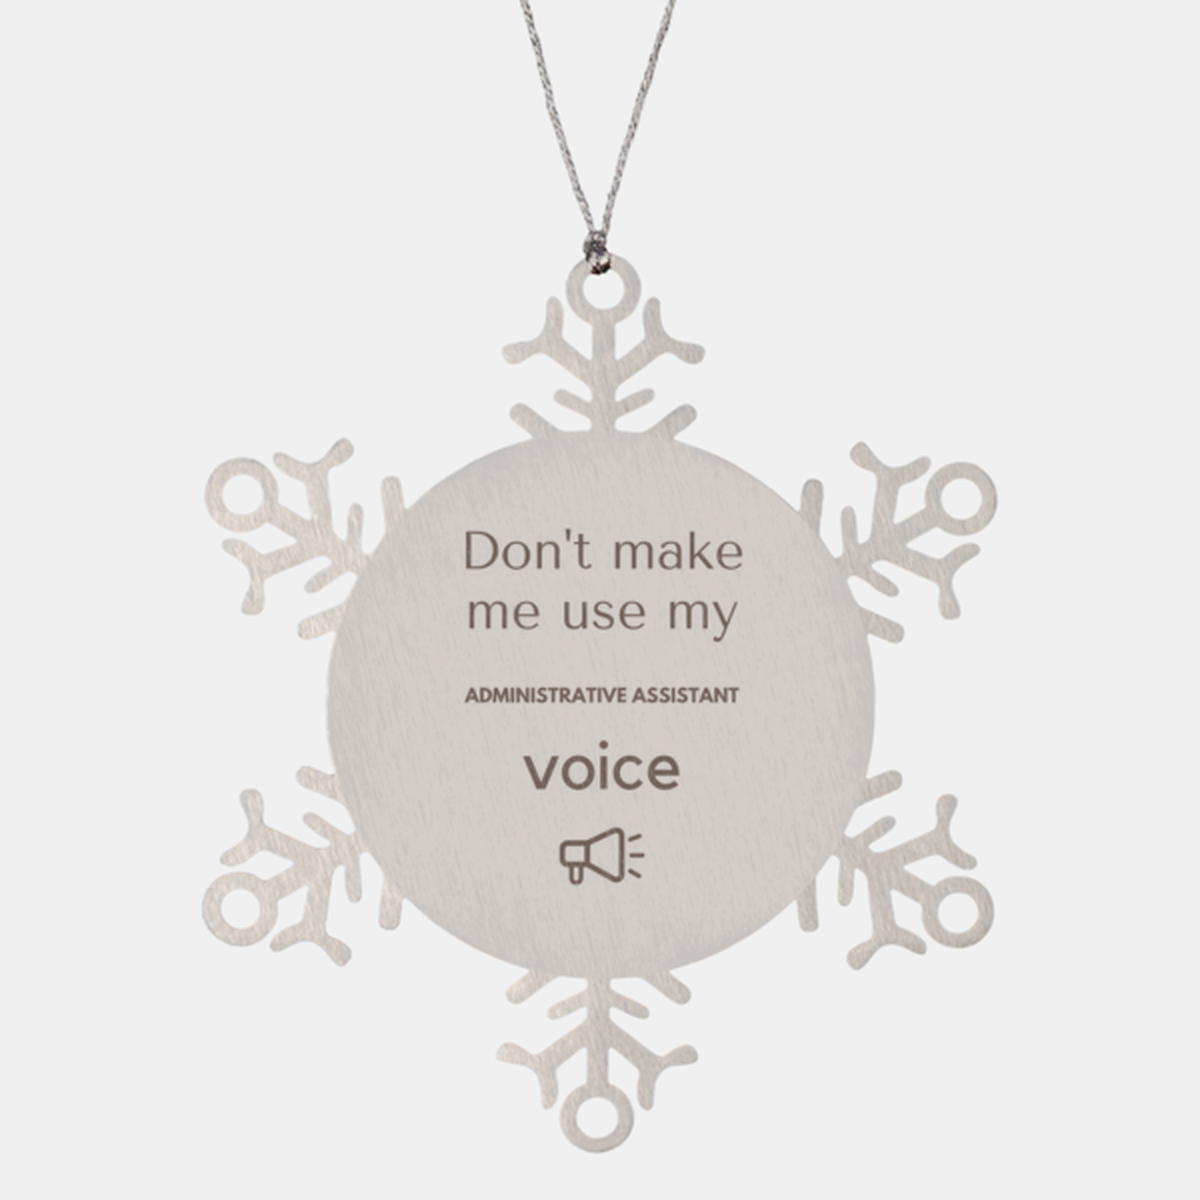 Don't make me use my Administrative Assistant voice, Sarcasm Administrative Assistant Ornament Gifts, Christmas Administrative Assistant Snowflake Ornament Unique Gifts For Administrative Assistant Coworkers, Men, Women, Colleague, Friends